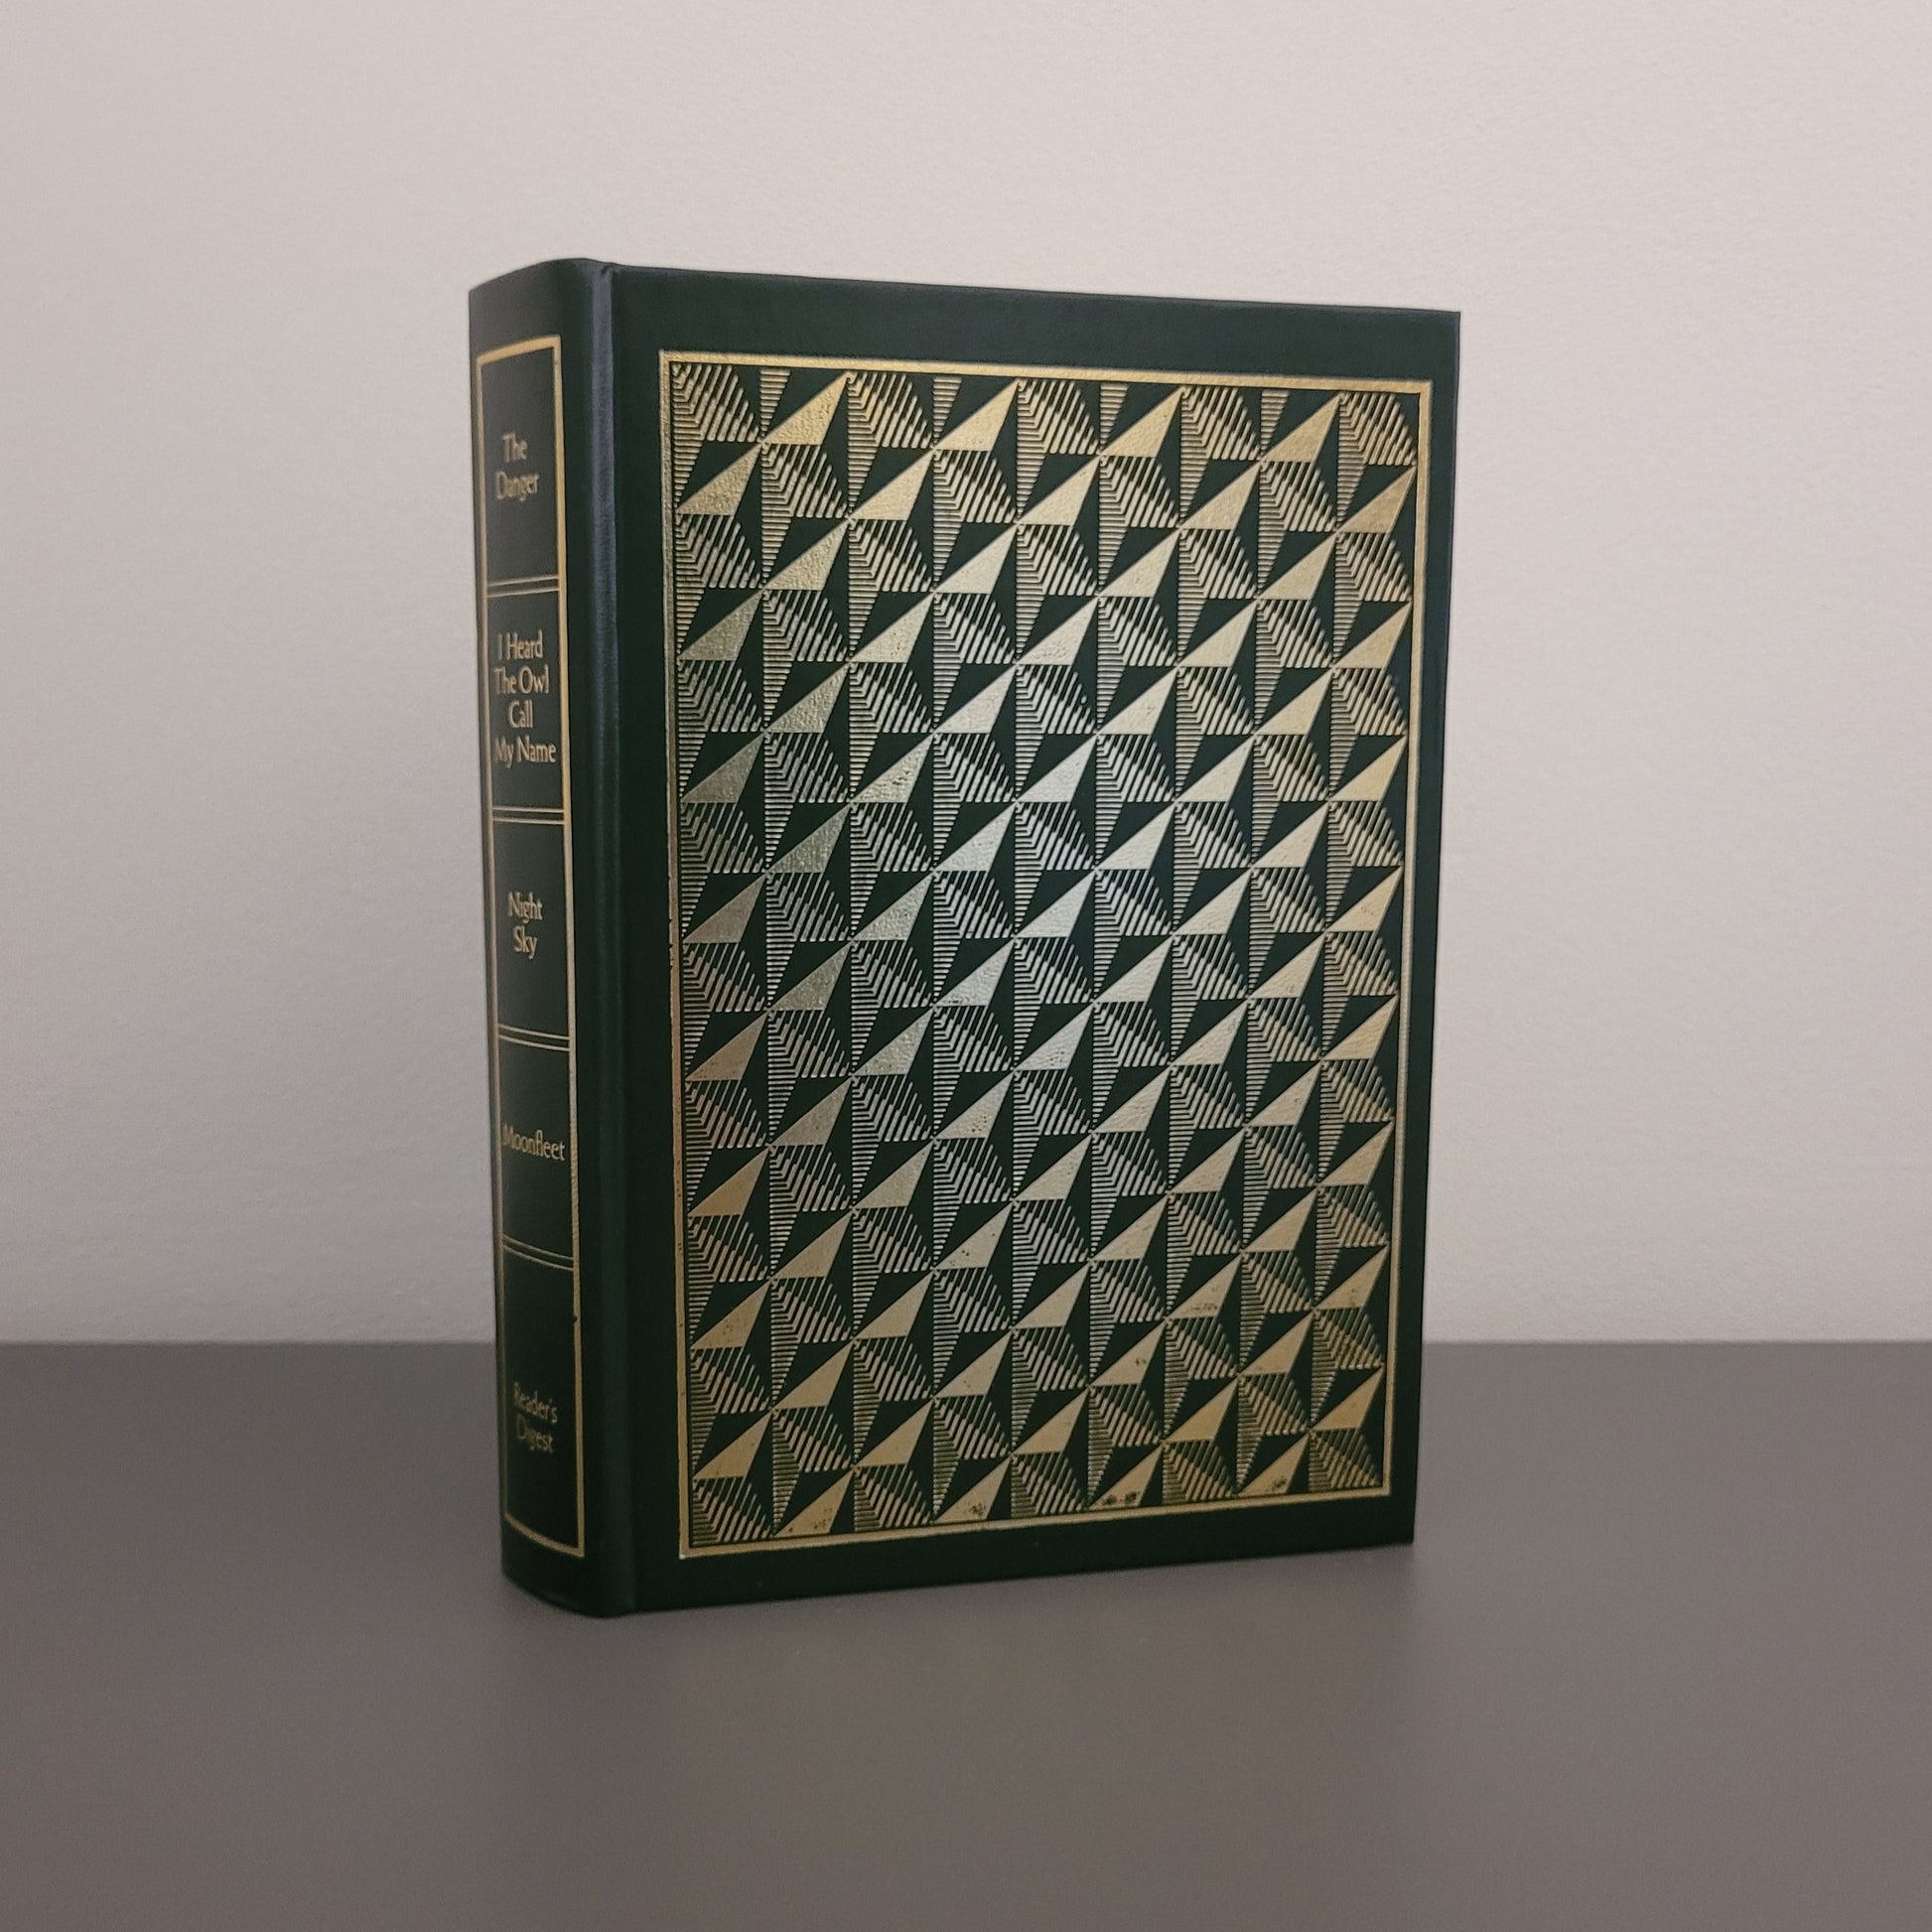 A picture of the front of the book fold - a dark green hardback, with a metallic pattern on the front.